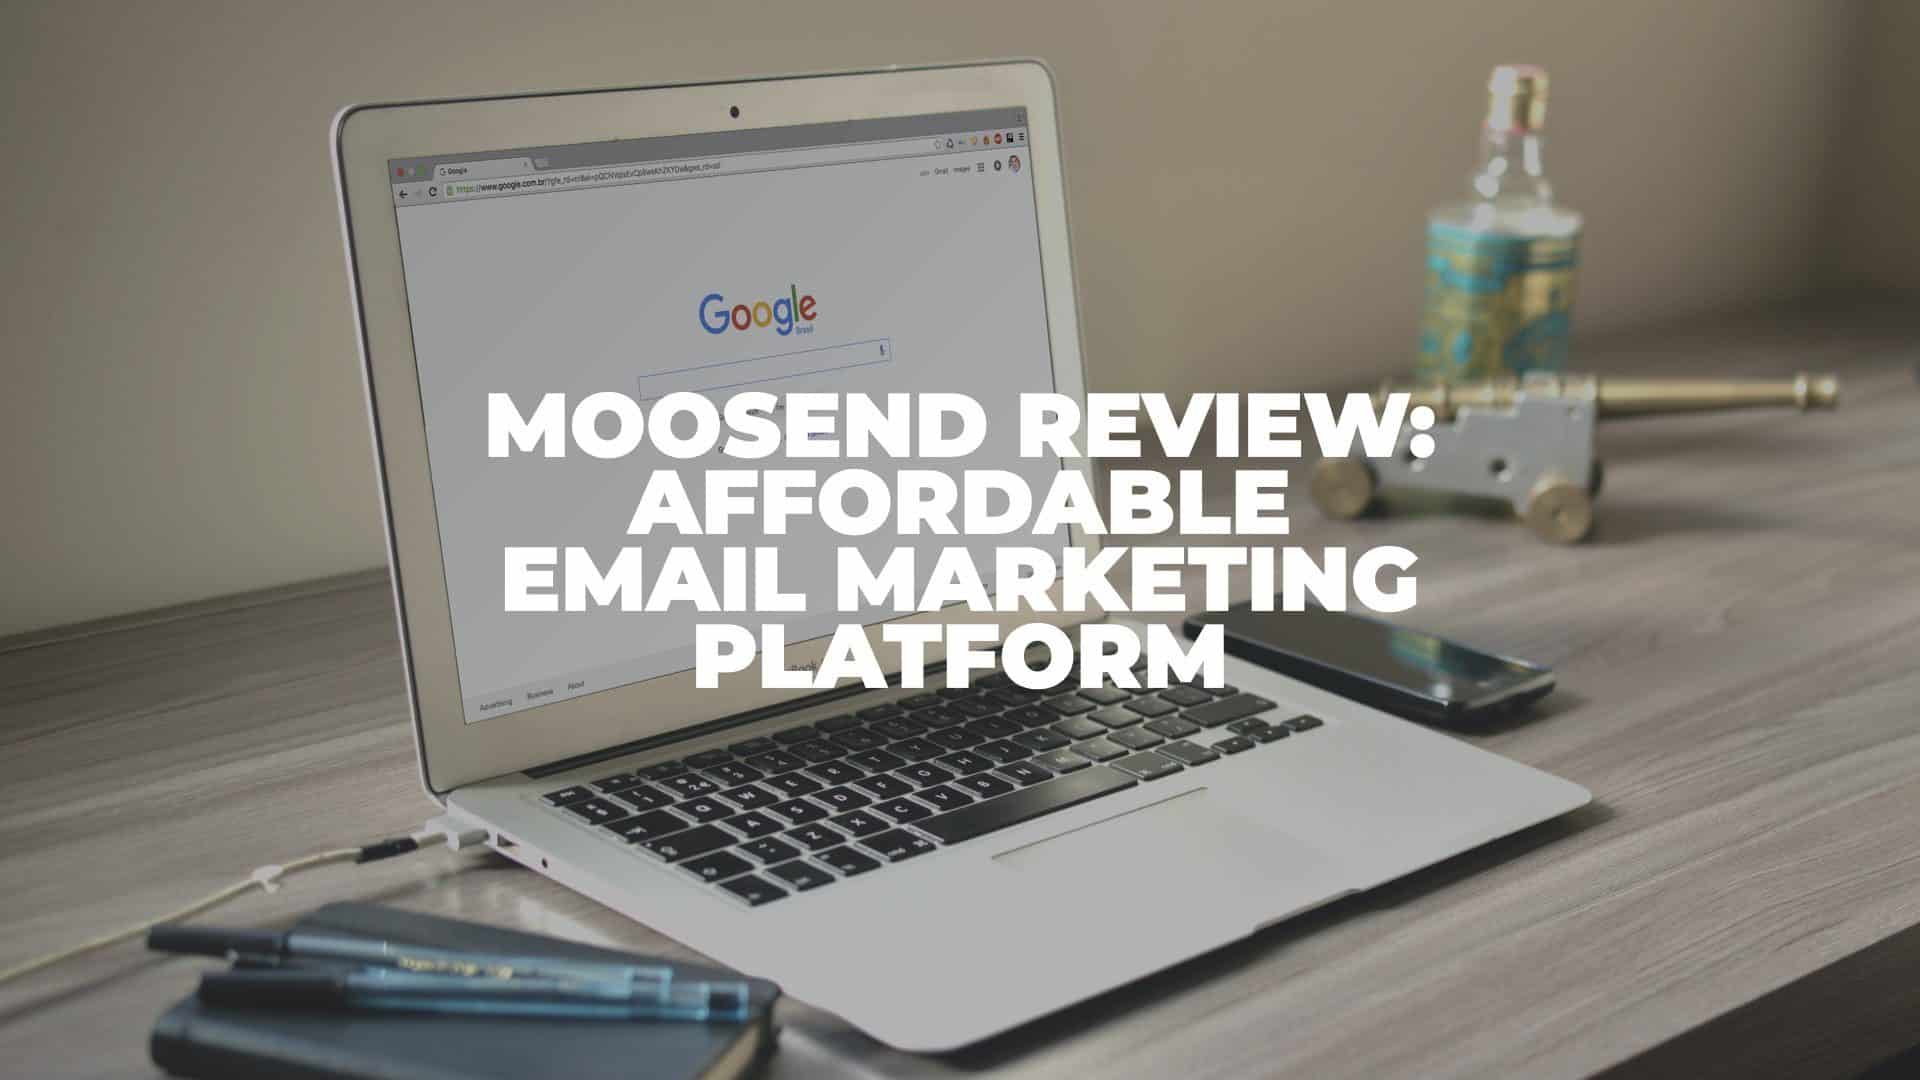 Moosend Review - Featured Image